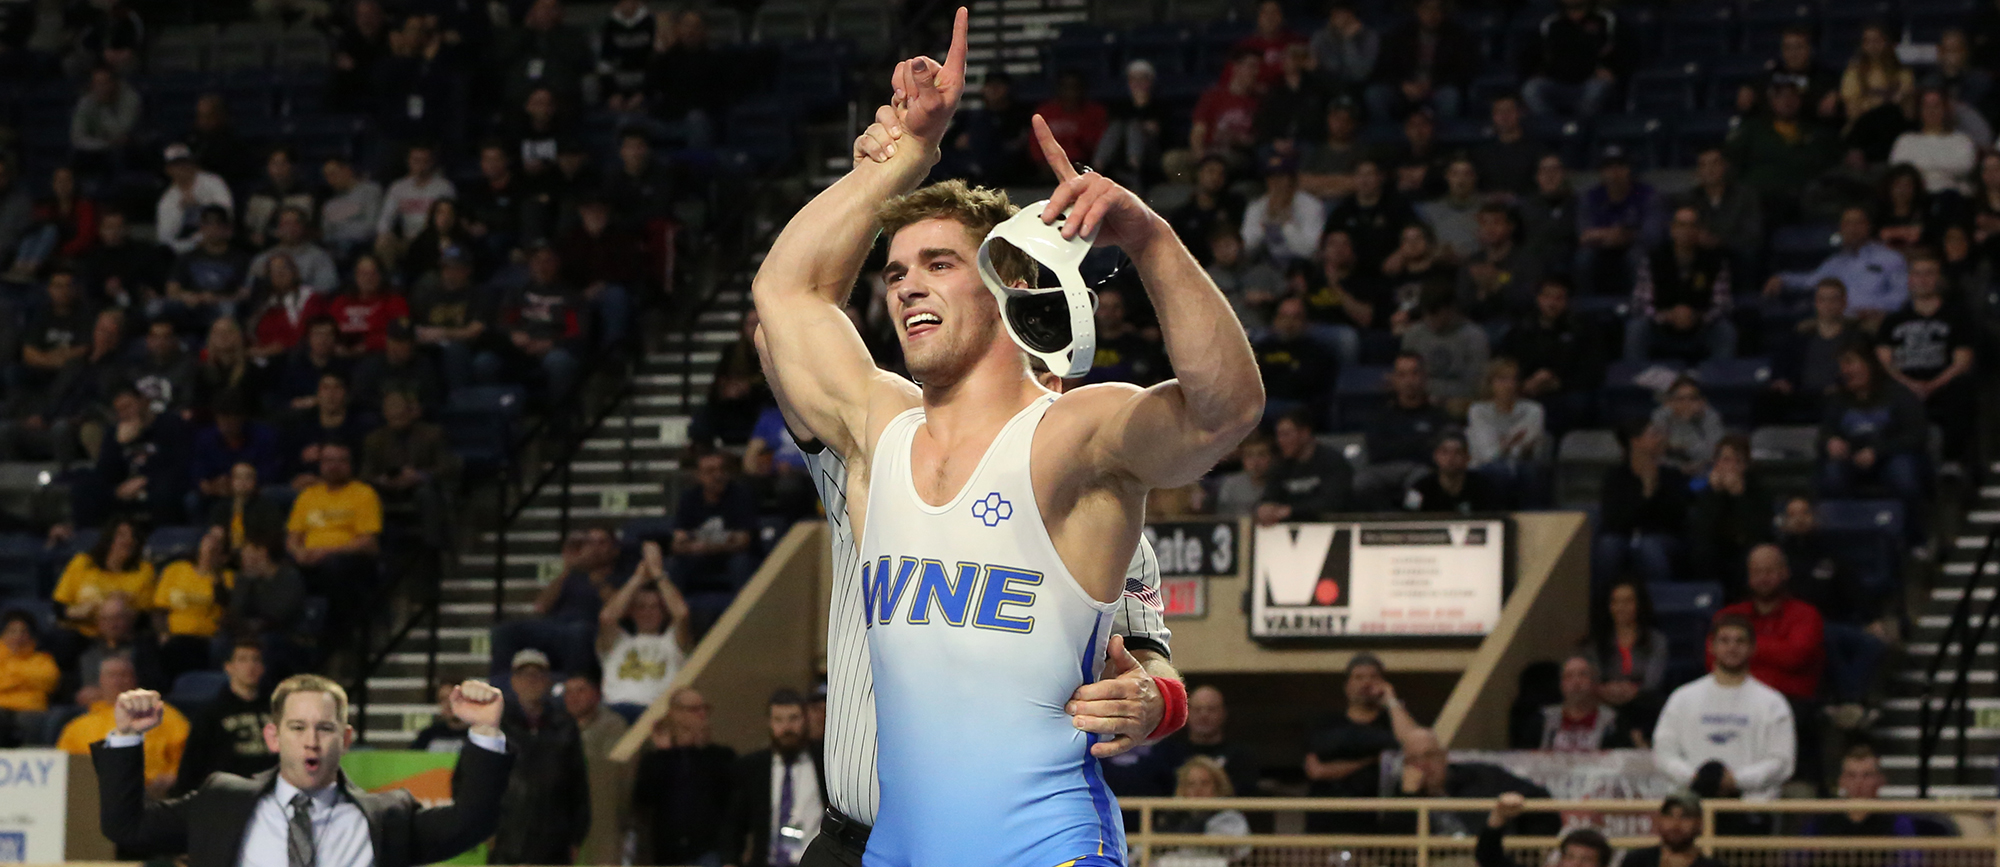 John Boyle became Western New England's first national champion with his 5-3 sudden victory result over Jake Ashcraft in the 184-pound title bout on Saturday night at the NCAA DIII Championships in Roanoke, VA. (Photo by Geoff Riccio)